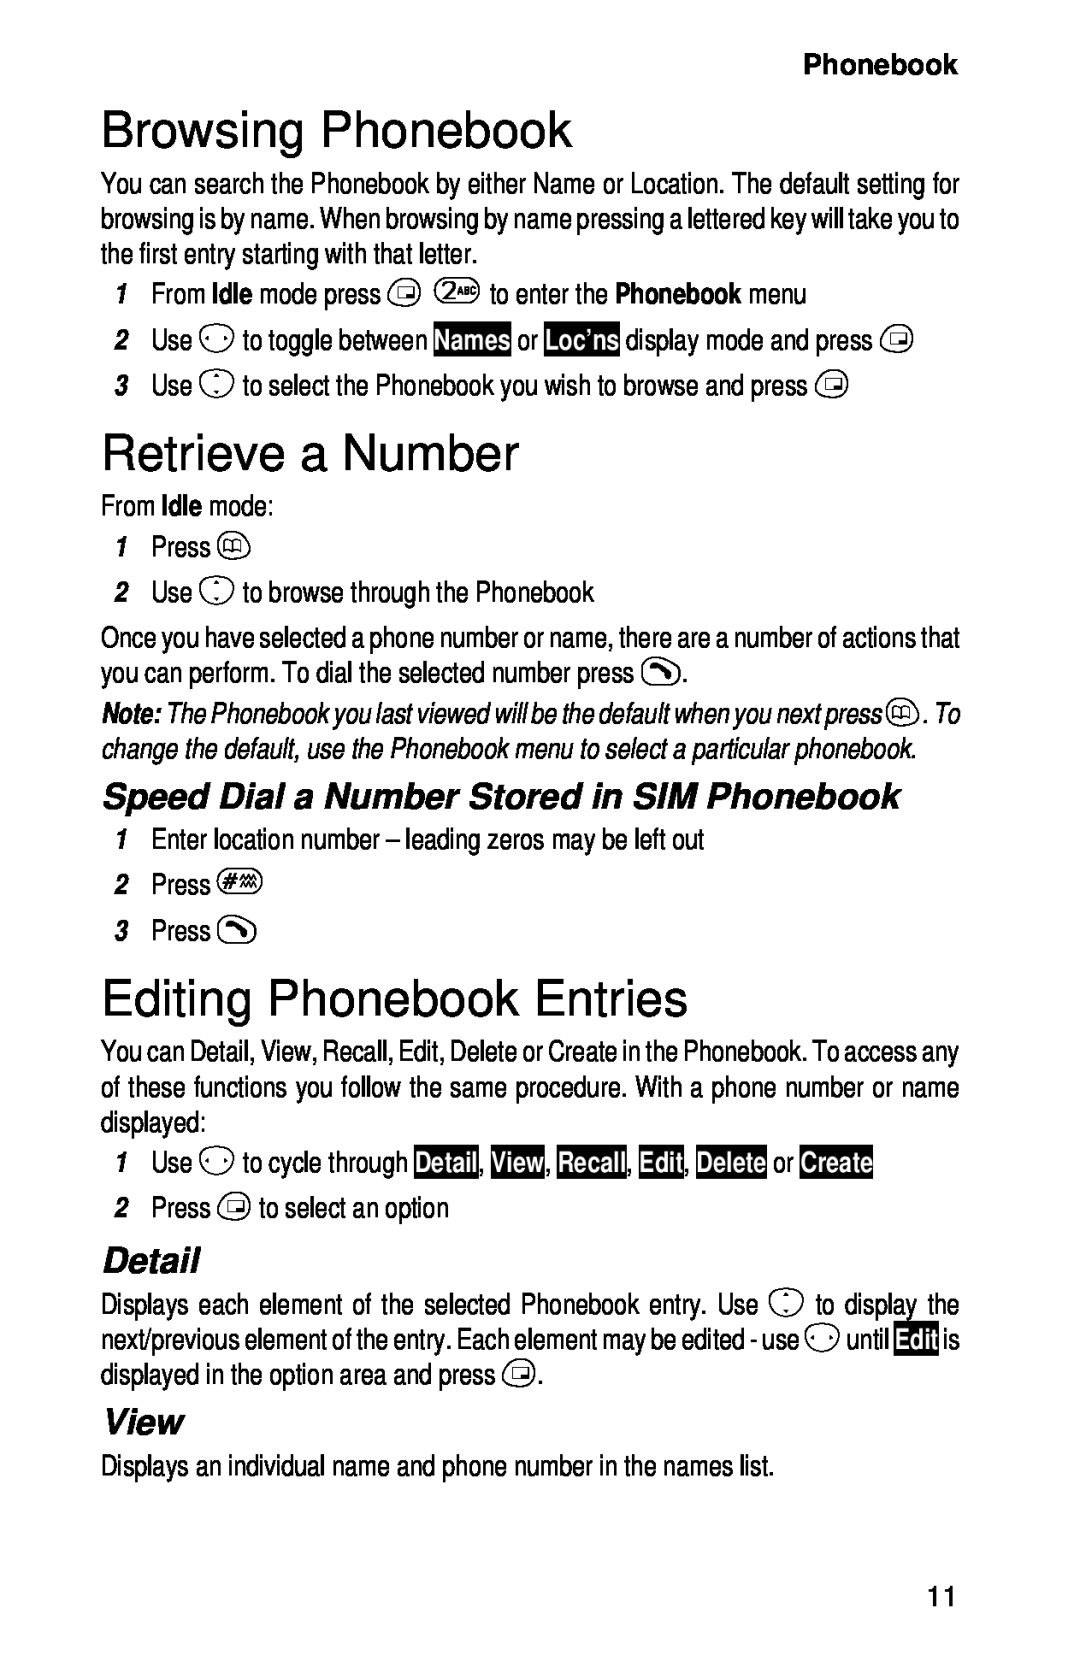 Panasonic EB-GD52 operating instructions Browsing Phonebook, Retrieve a Number, Editing Phonebook Entries, Detail, View 